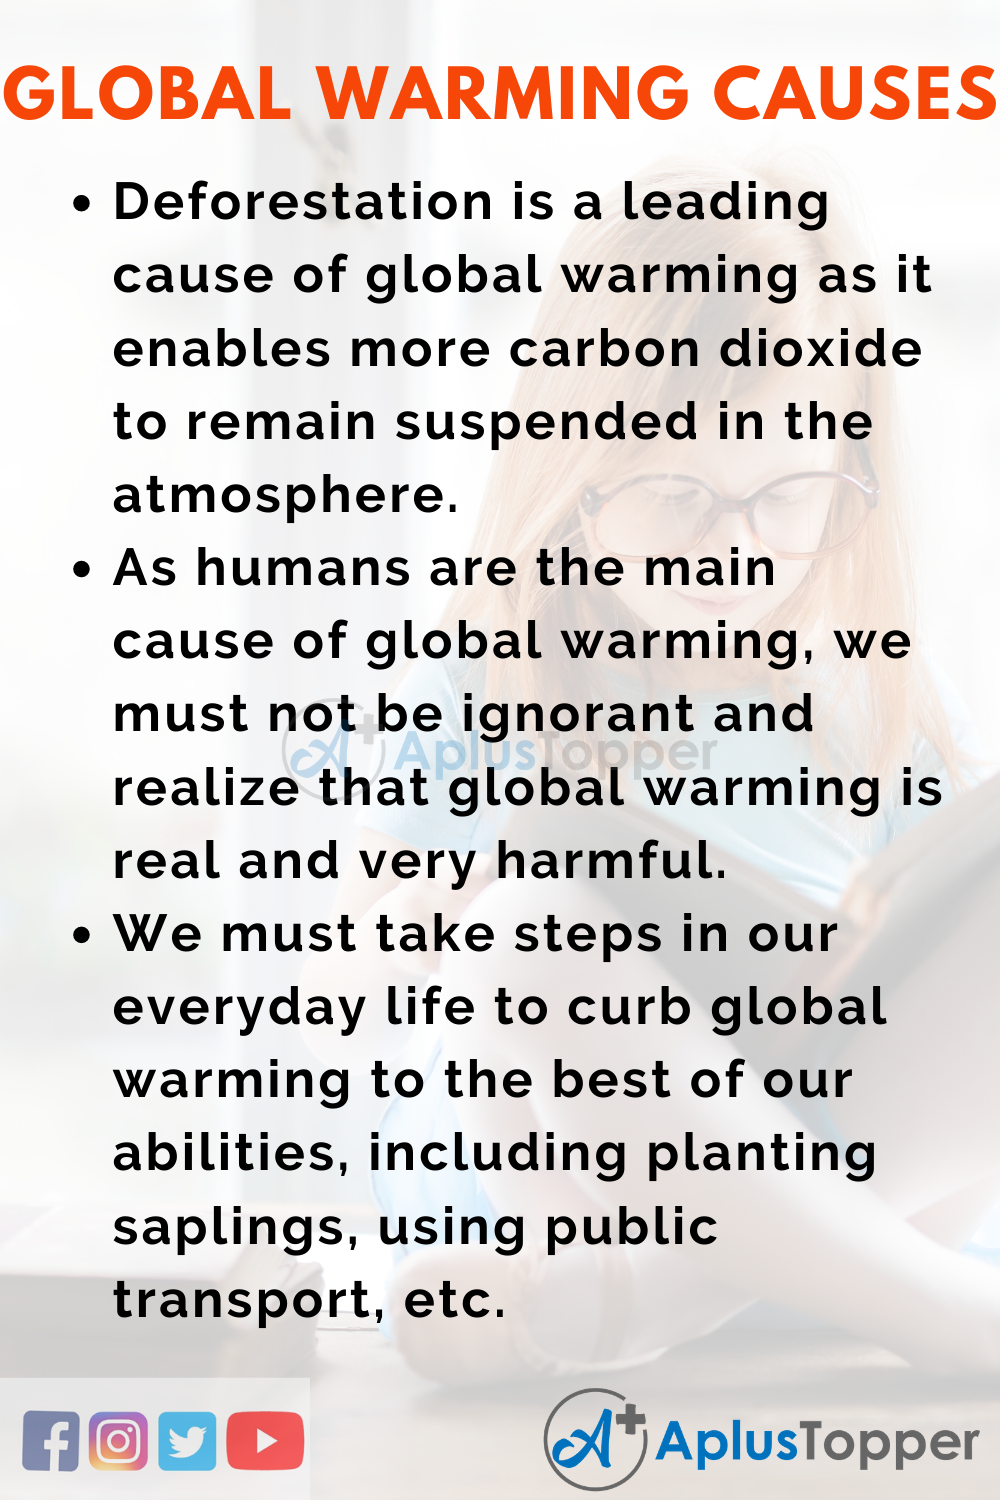 example research paper on global warming pdf